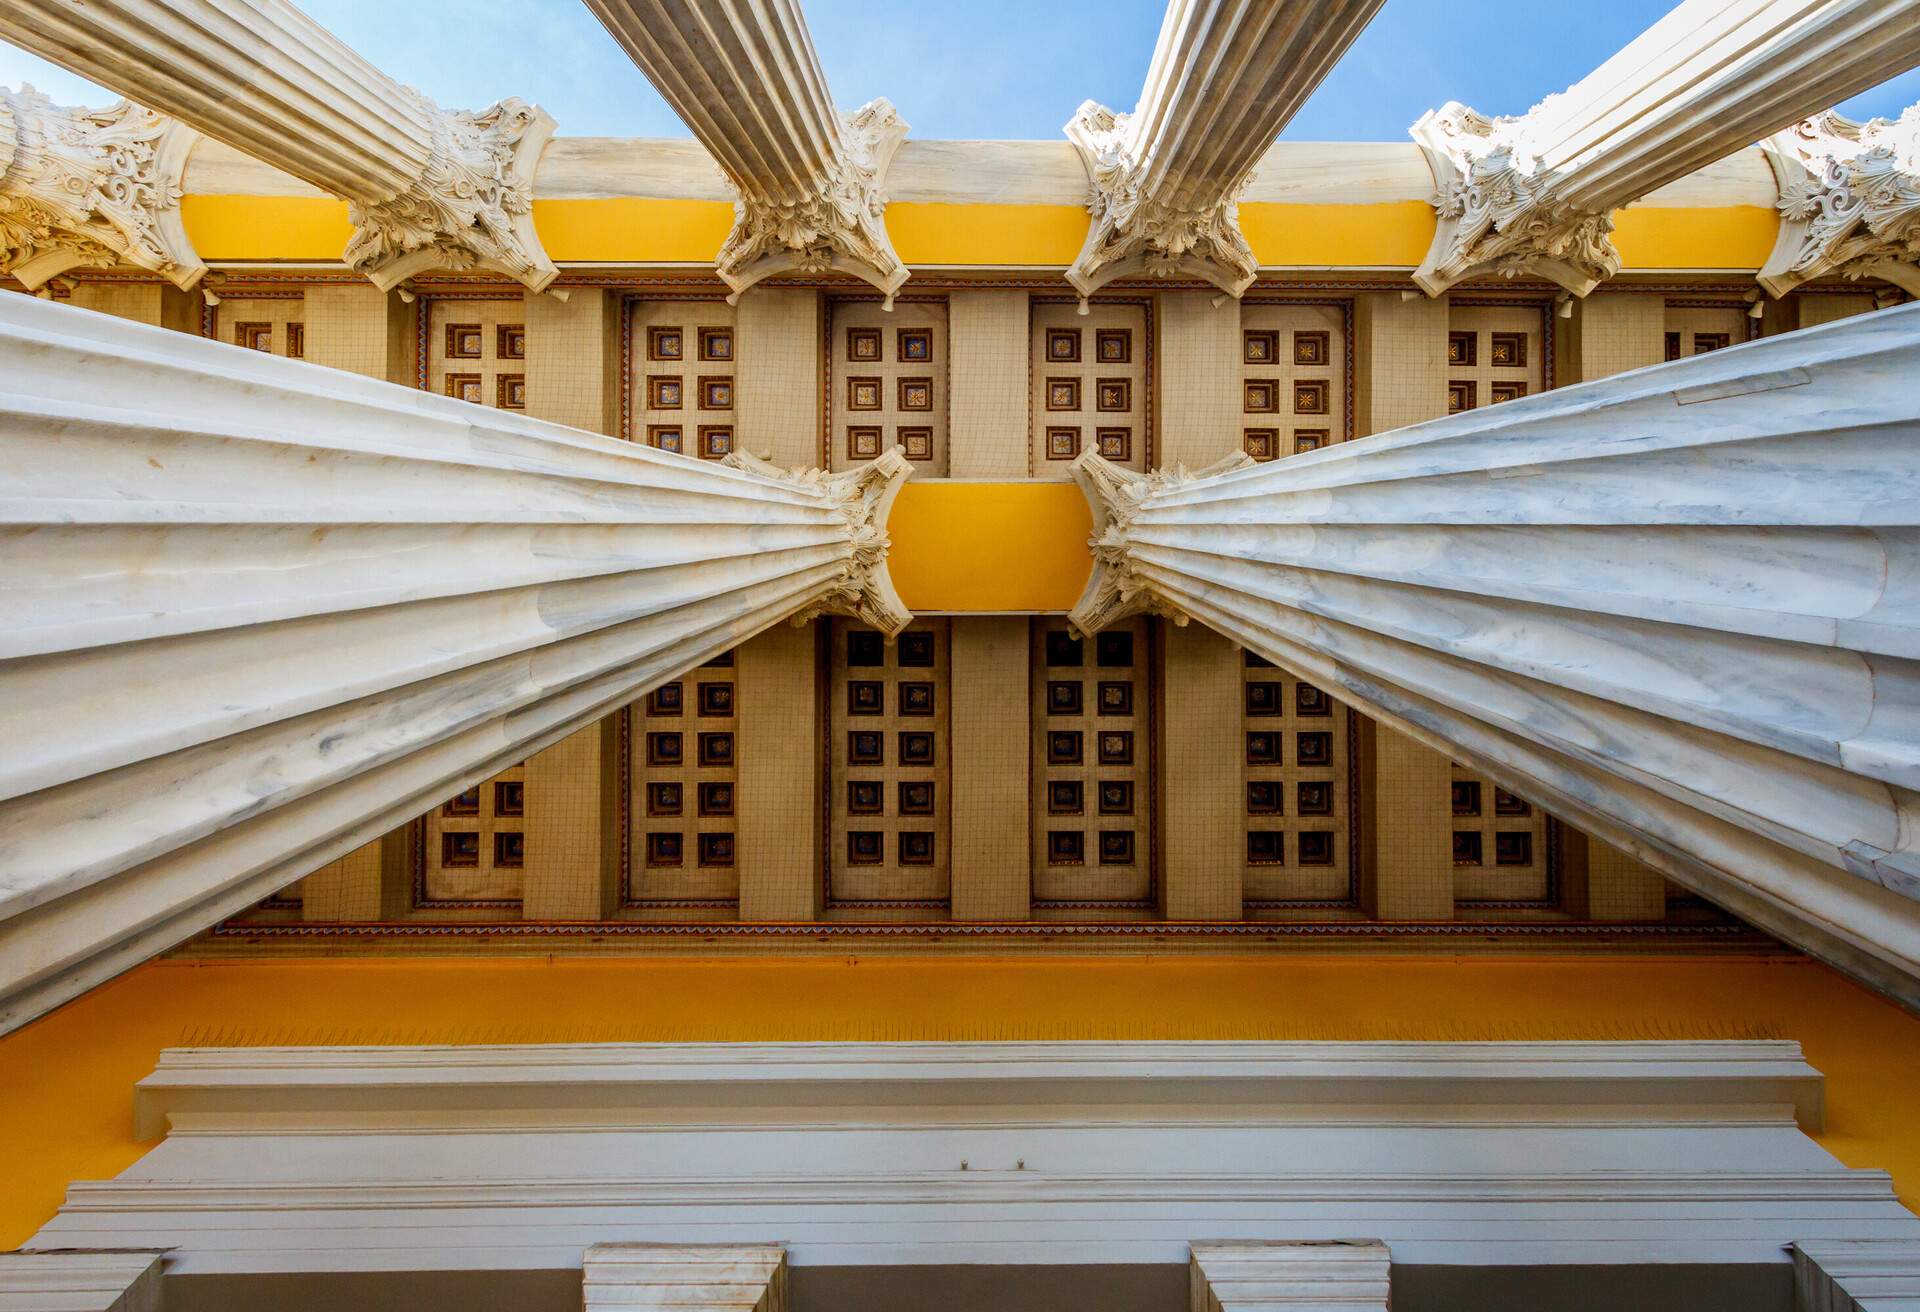 The ceiling of a building with columns is seen from below.